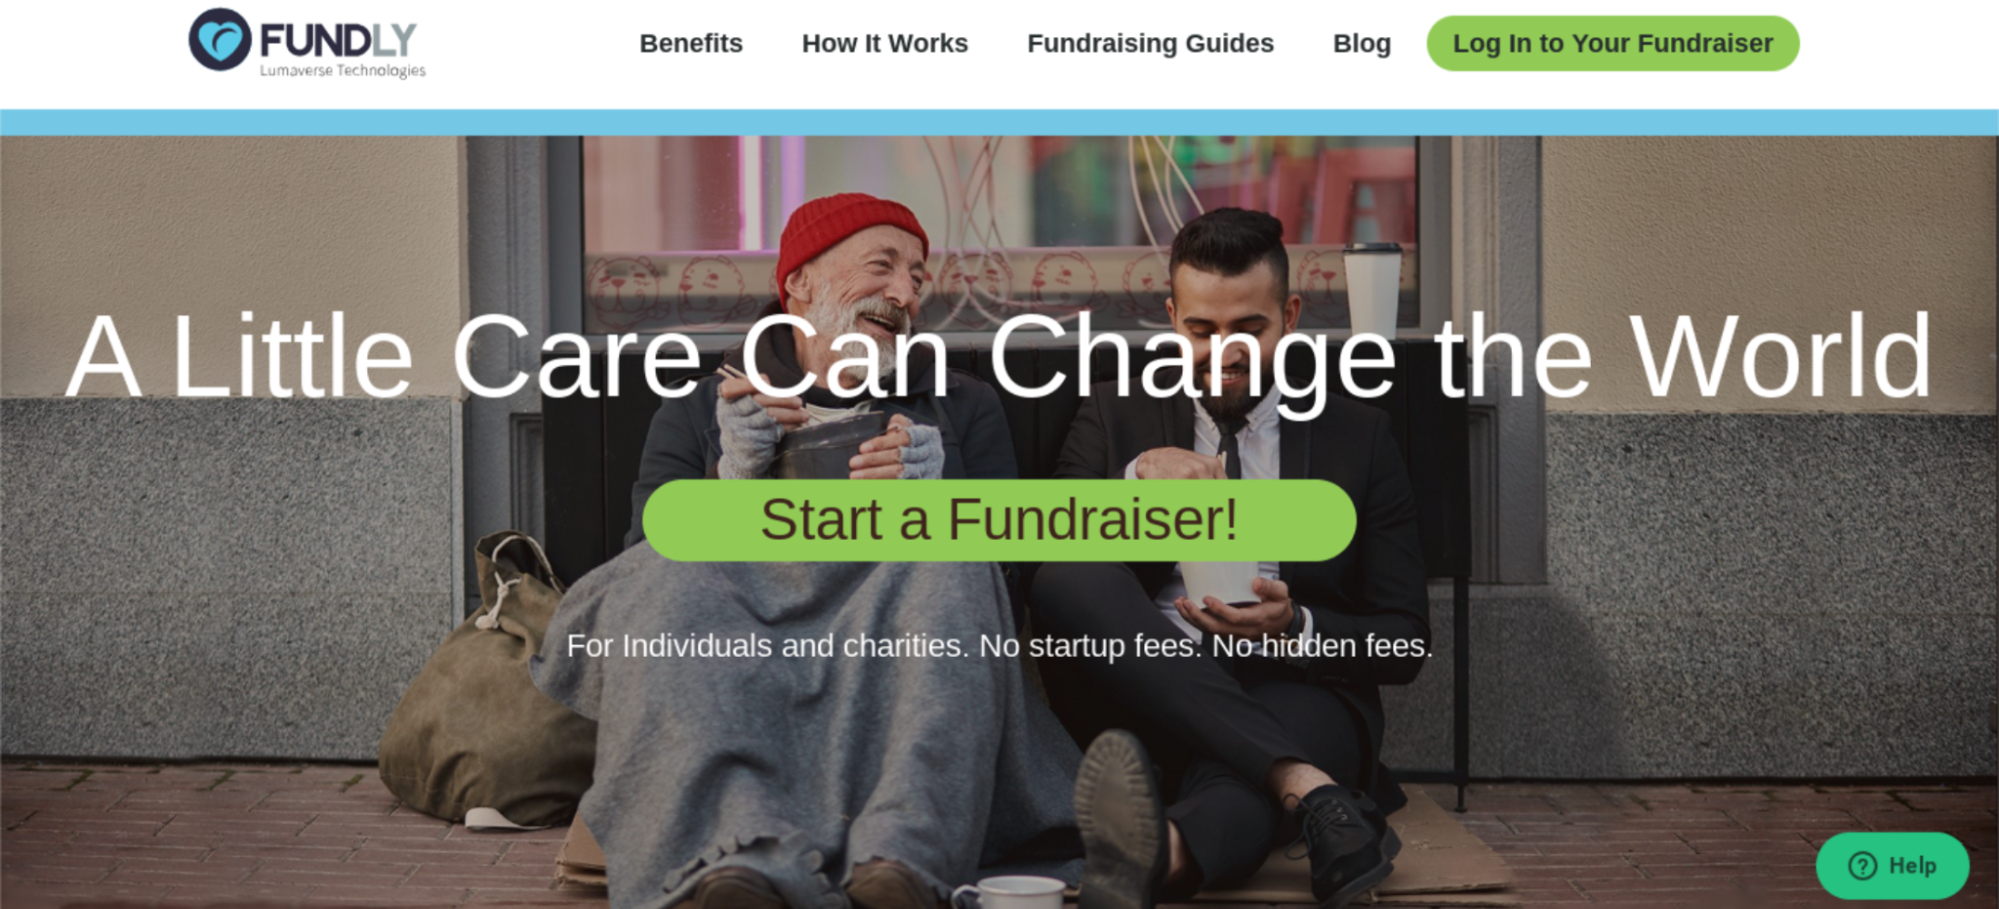 Fundly - an example of a top crowdfunding site